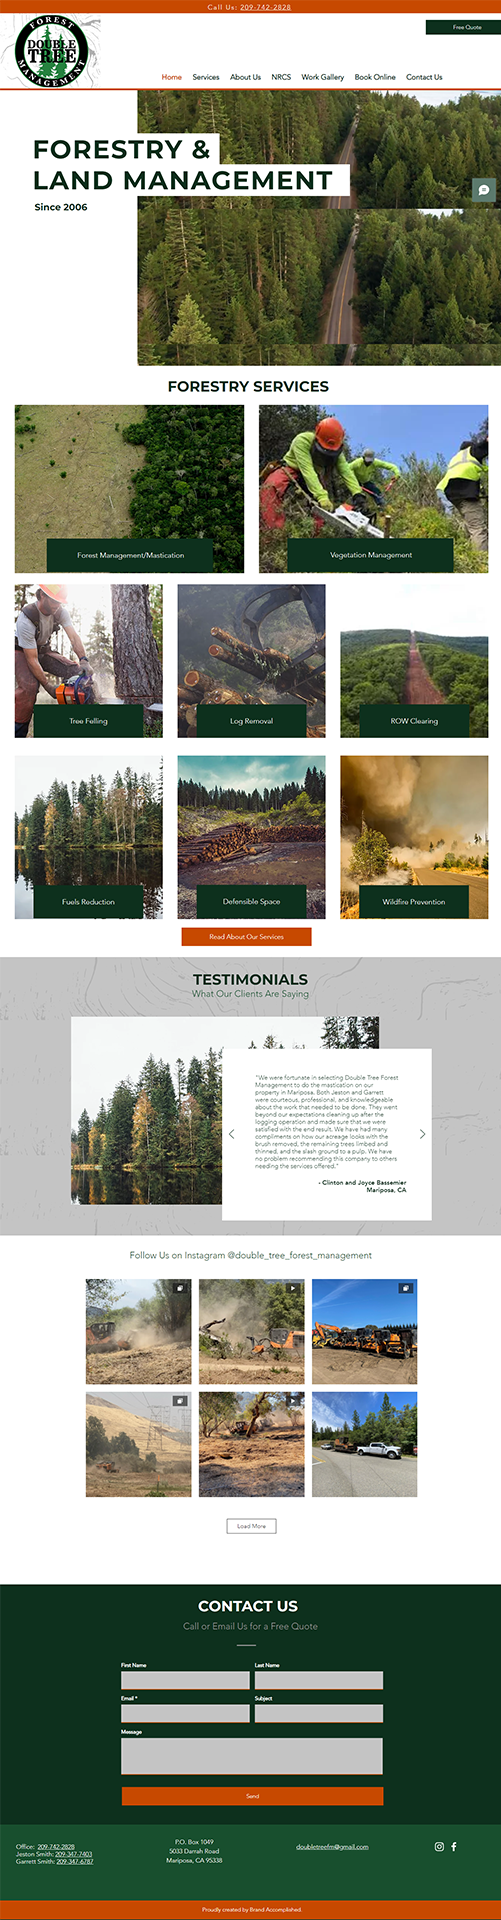 Double Tree Forest Management webpage